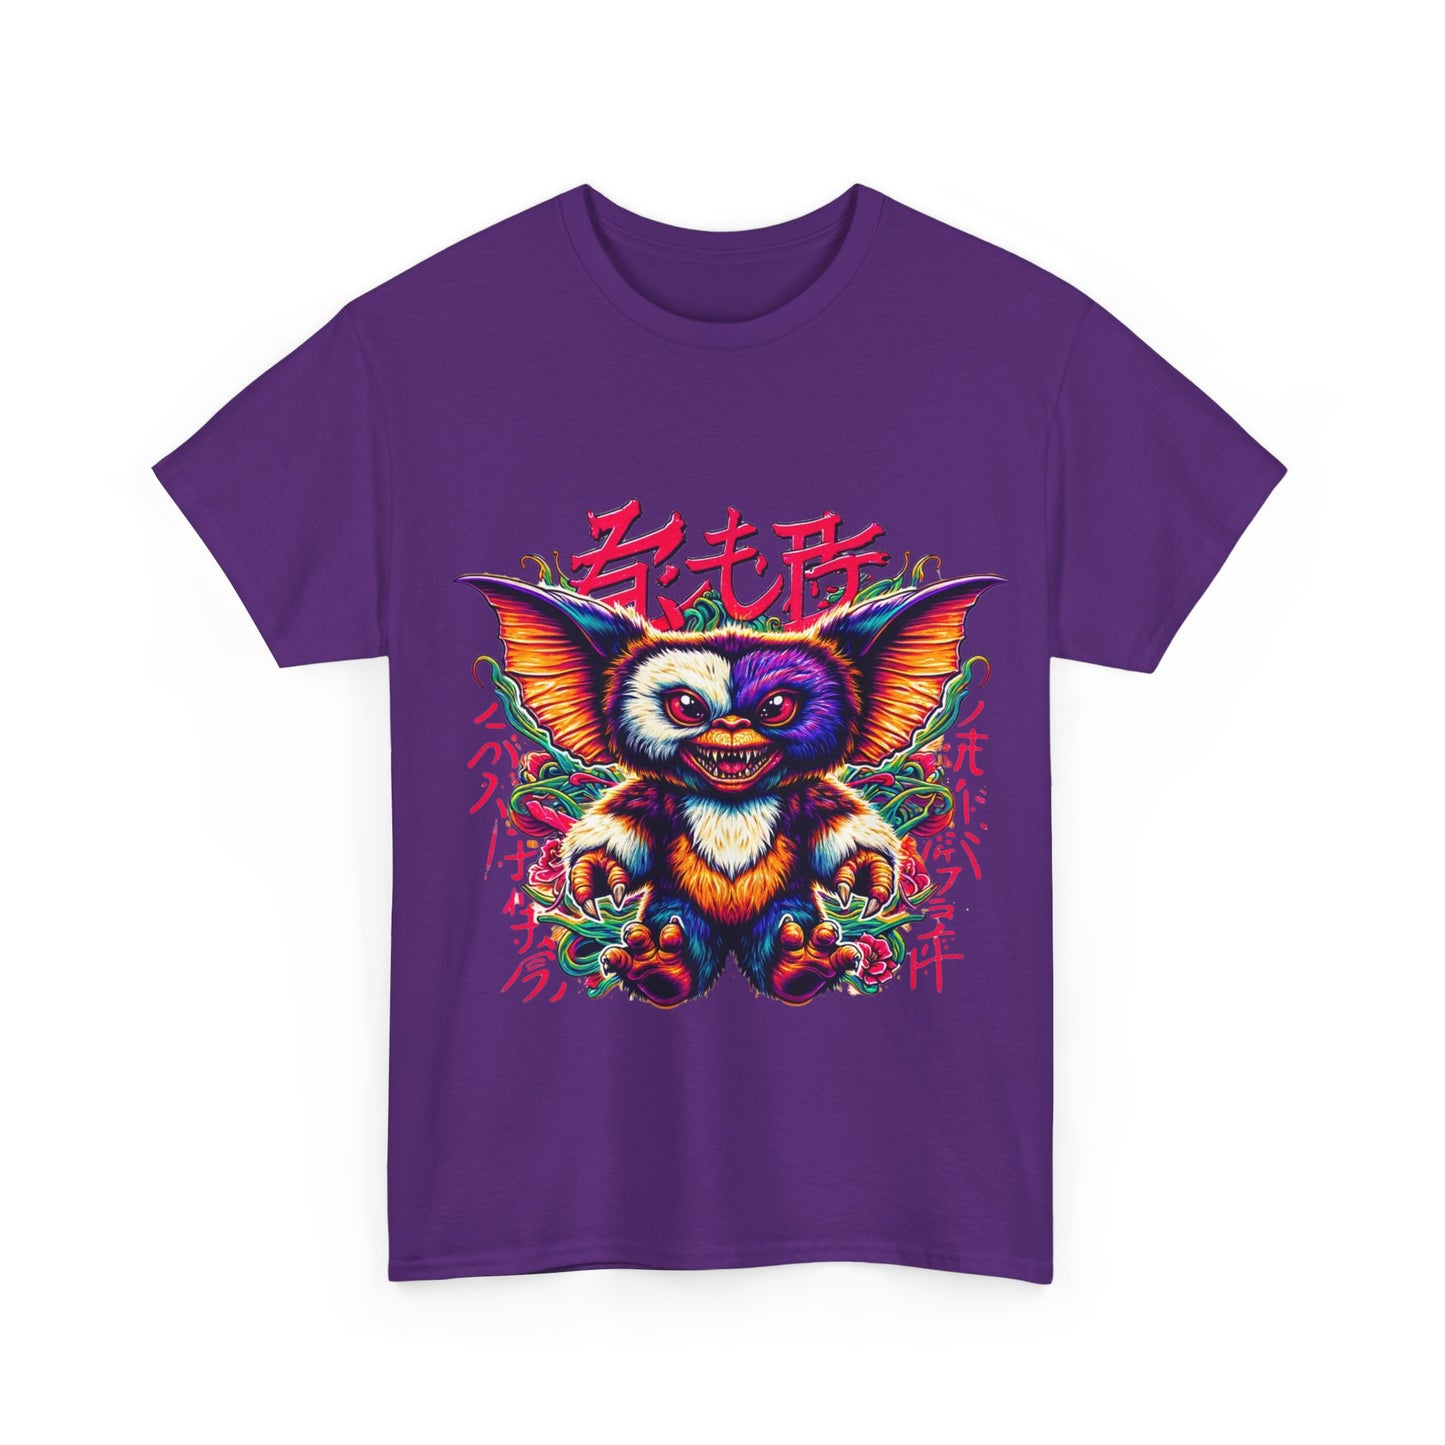 Y.M.L.Y. "Gremlins Out of Japan" Monsters T-shirt Cool T-Shirts Unisex Heavy Cotton Tee